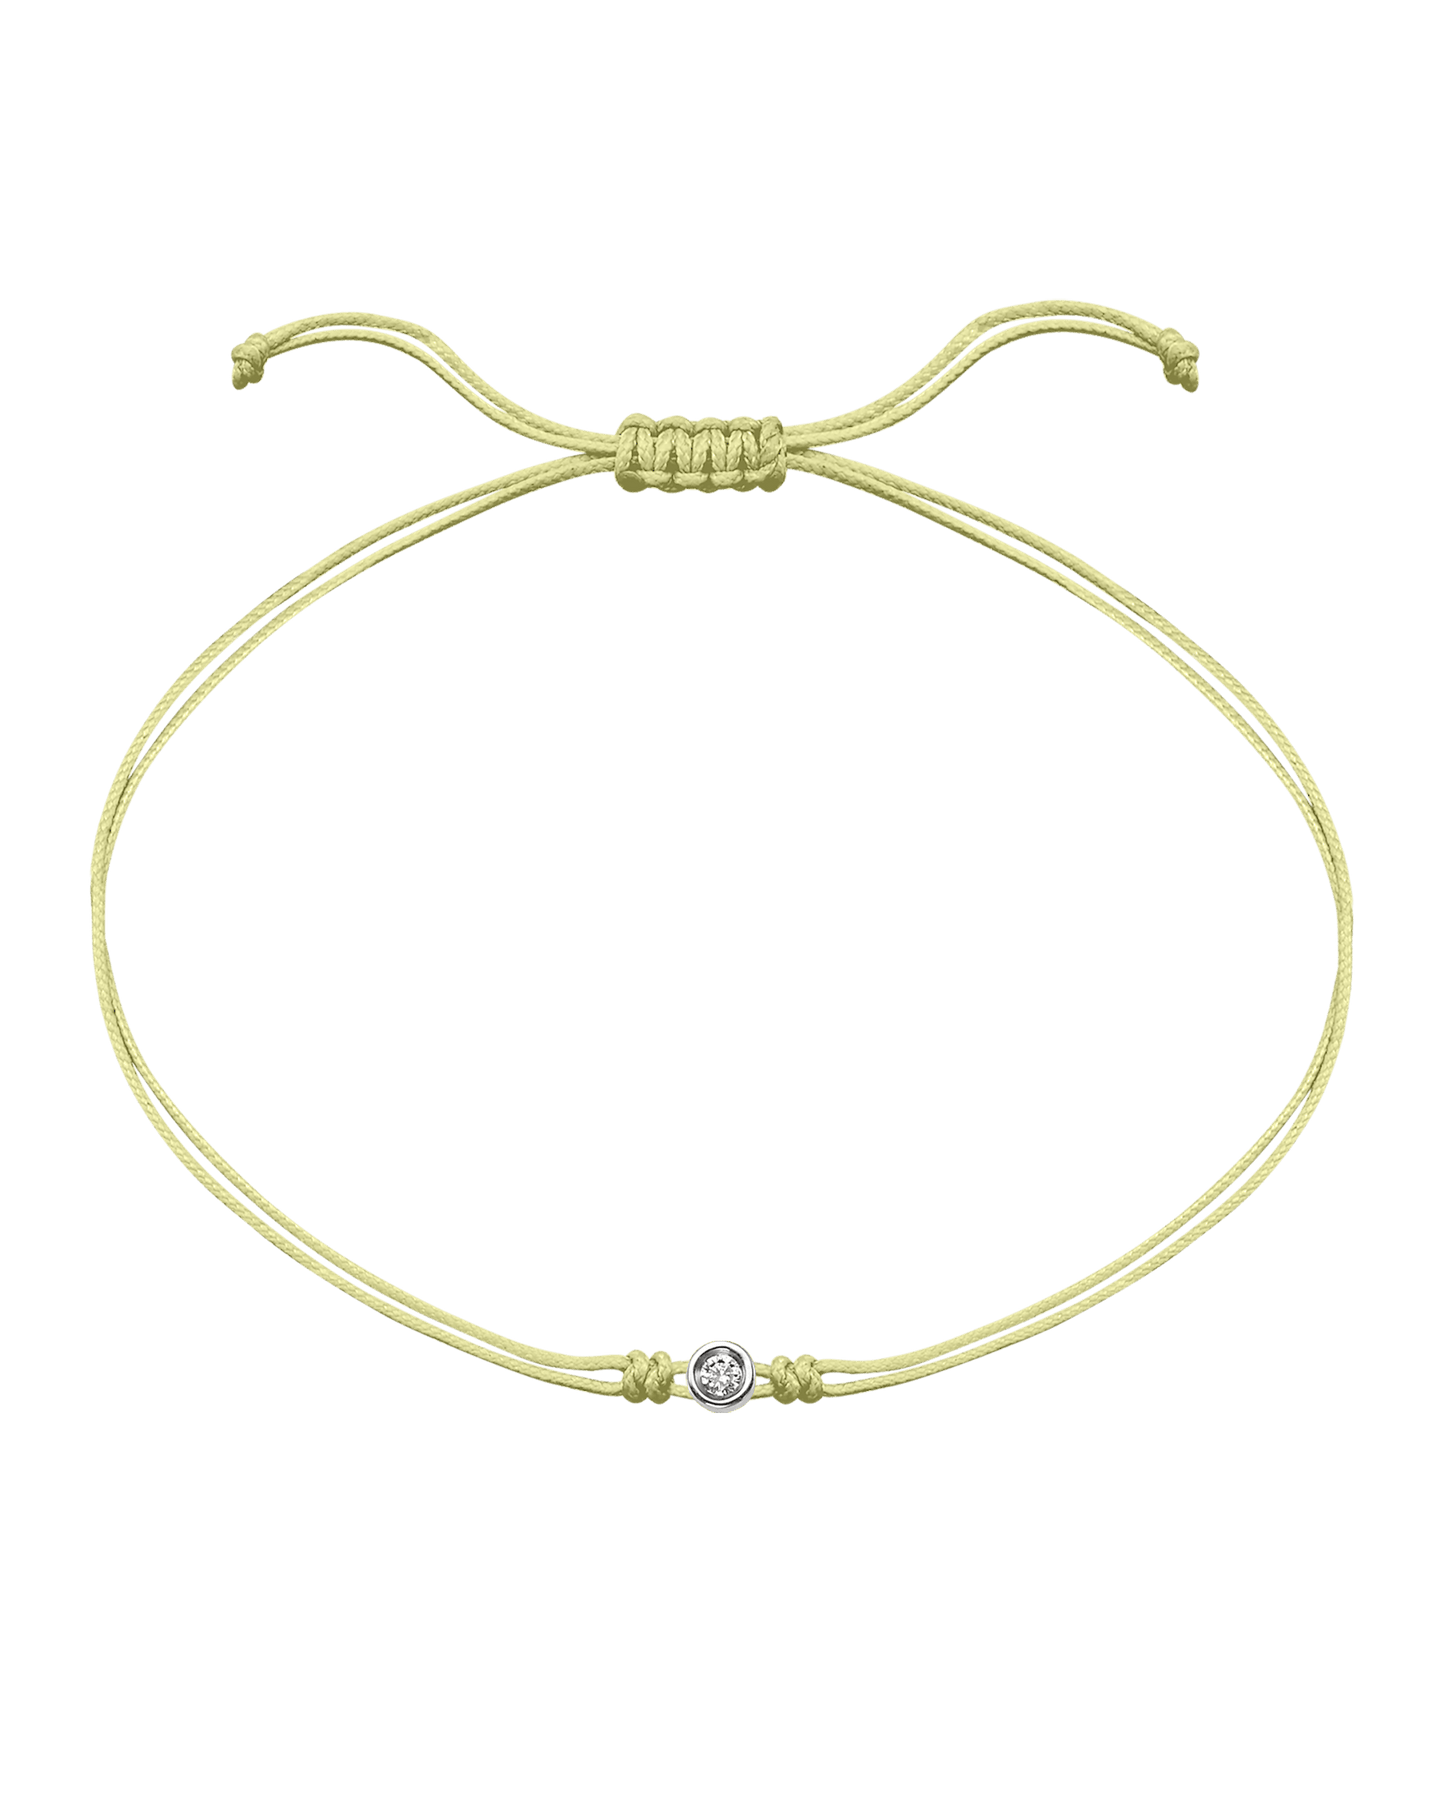 Summer Edition : The Classic String of Love - 14K White Gold Bracelets magal-dev Tropical Cosmopolitan - Light Yellow Small: 0.03ct 